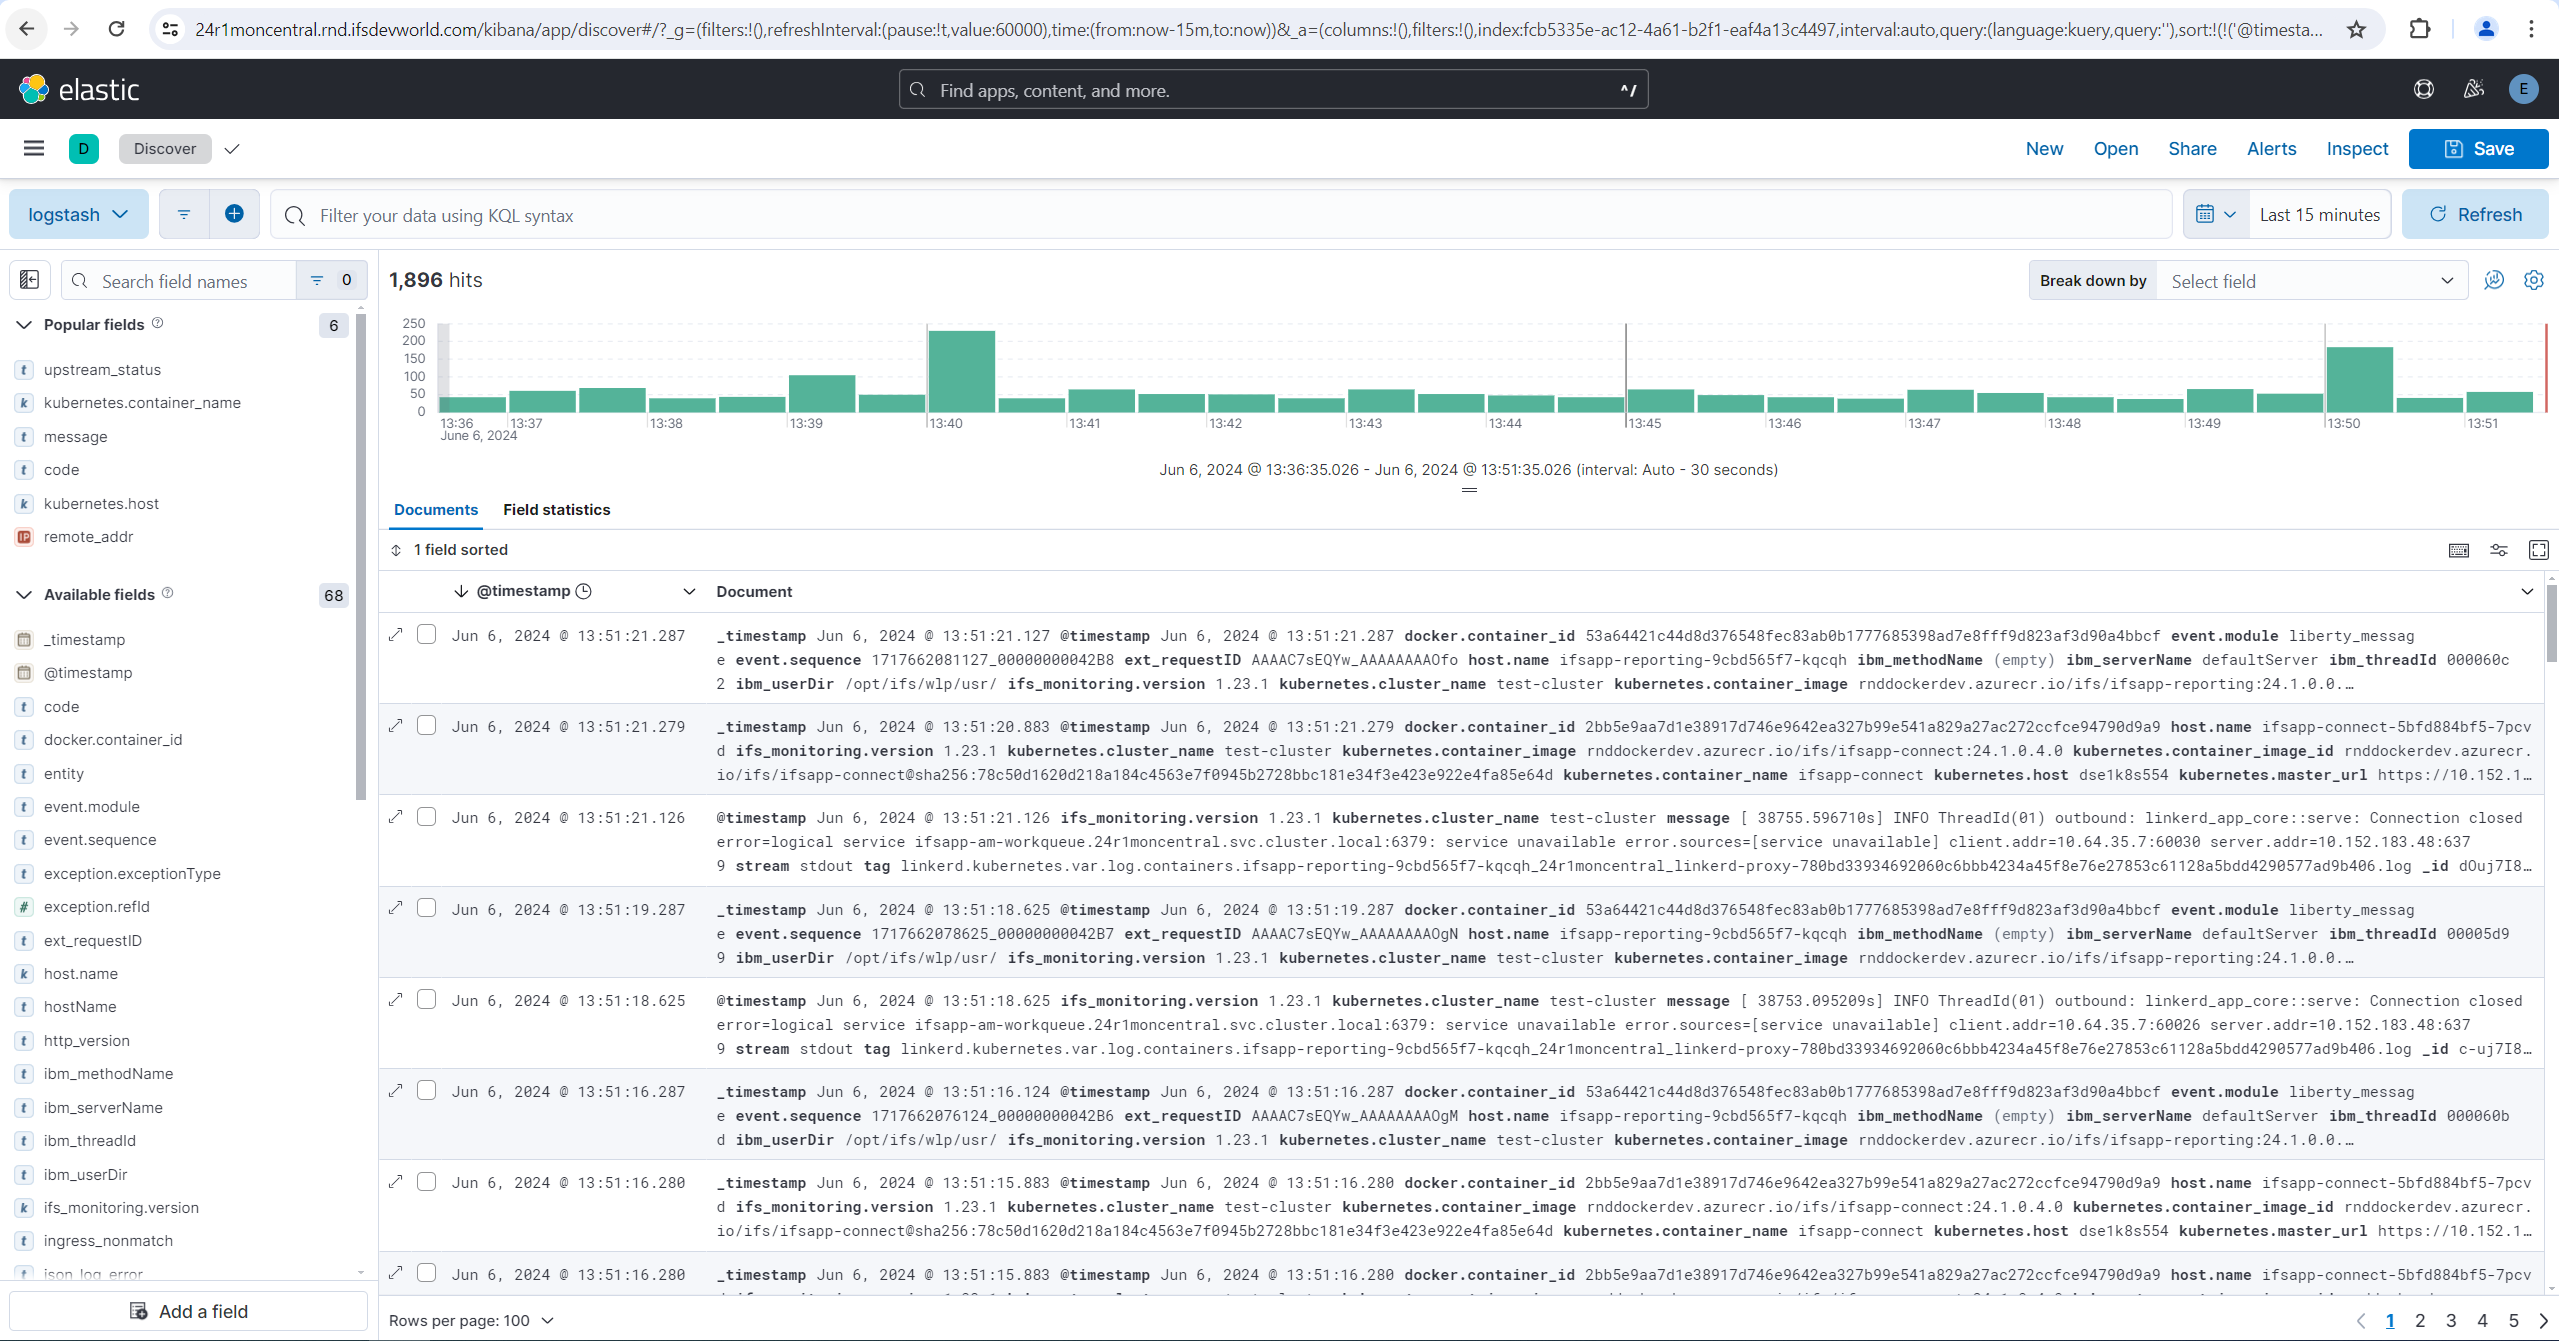 kibana discover view recods